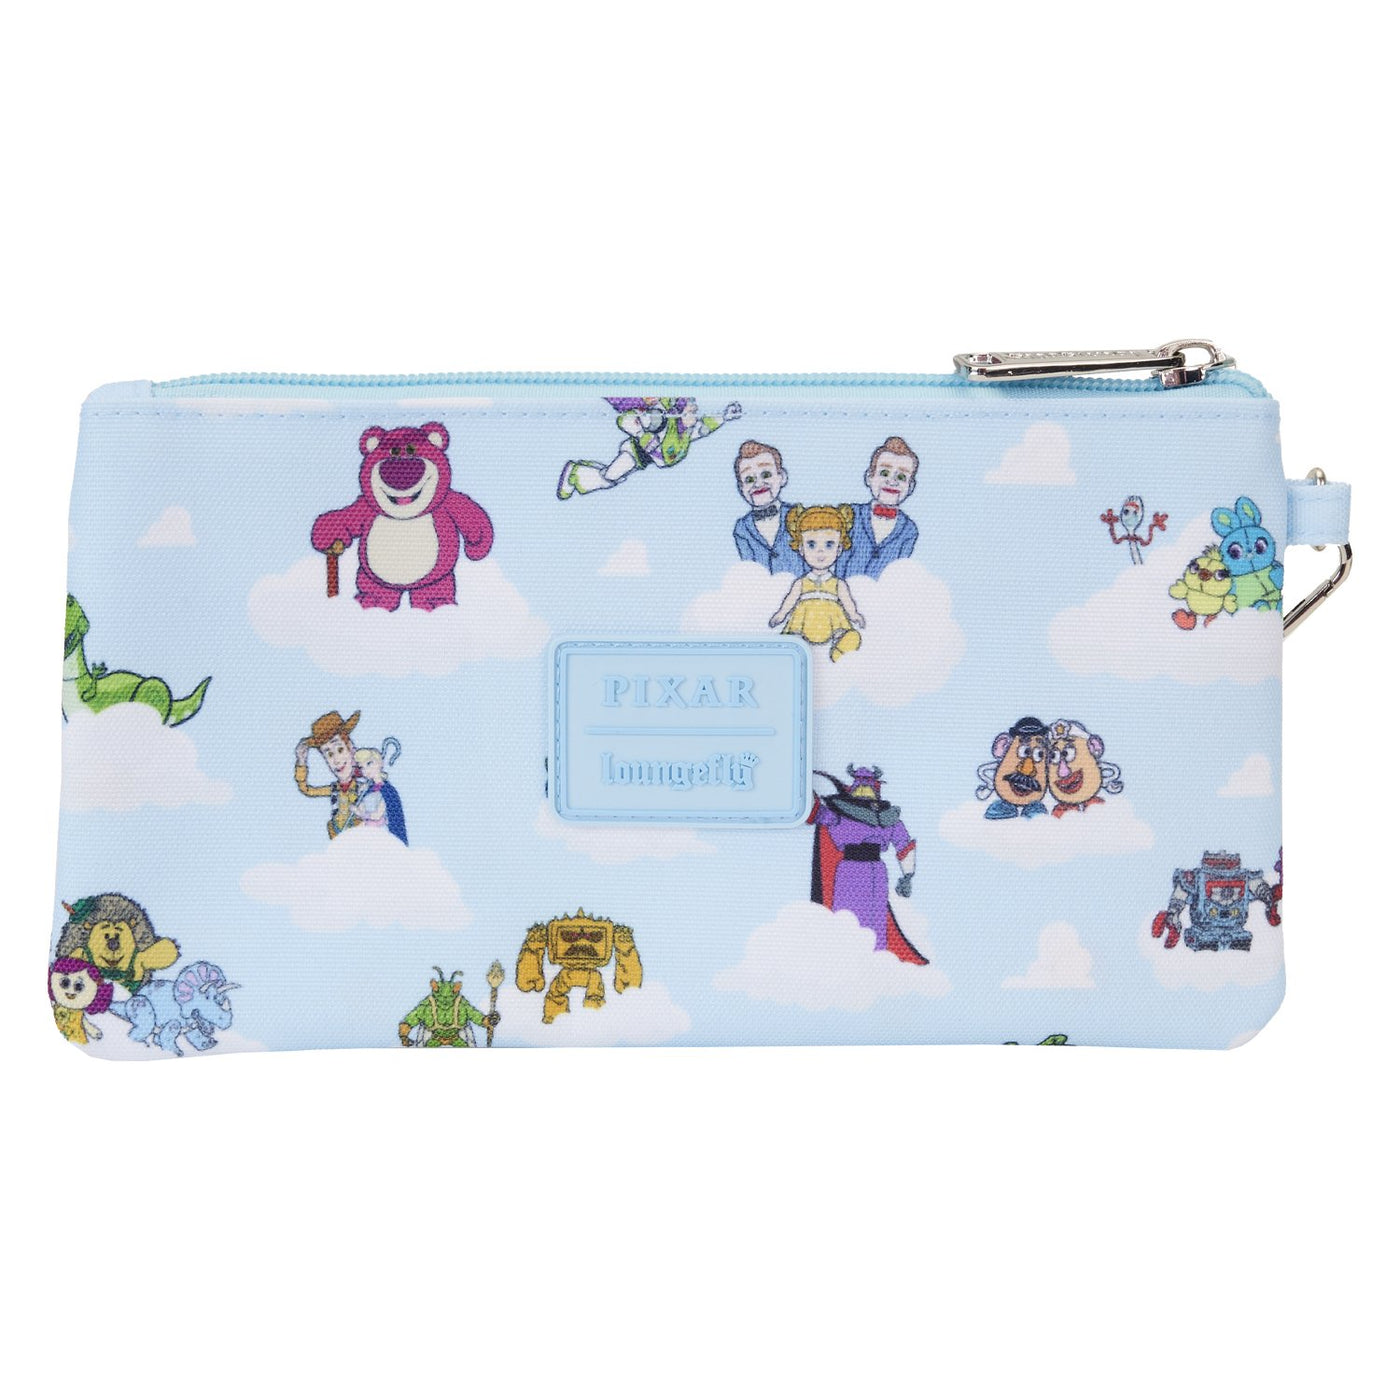 Loungefly Pixar Toy Story Movie Collab Allover Print Nylon Wristlet Wallet - Back